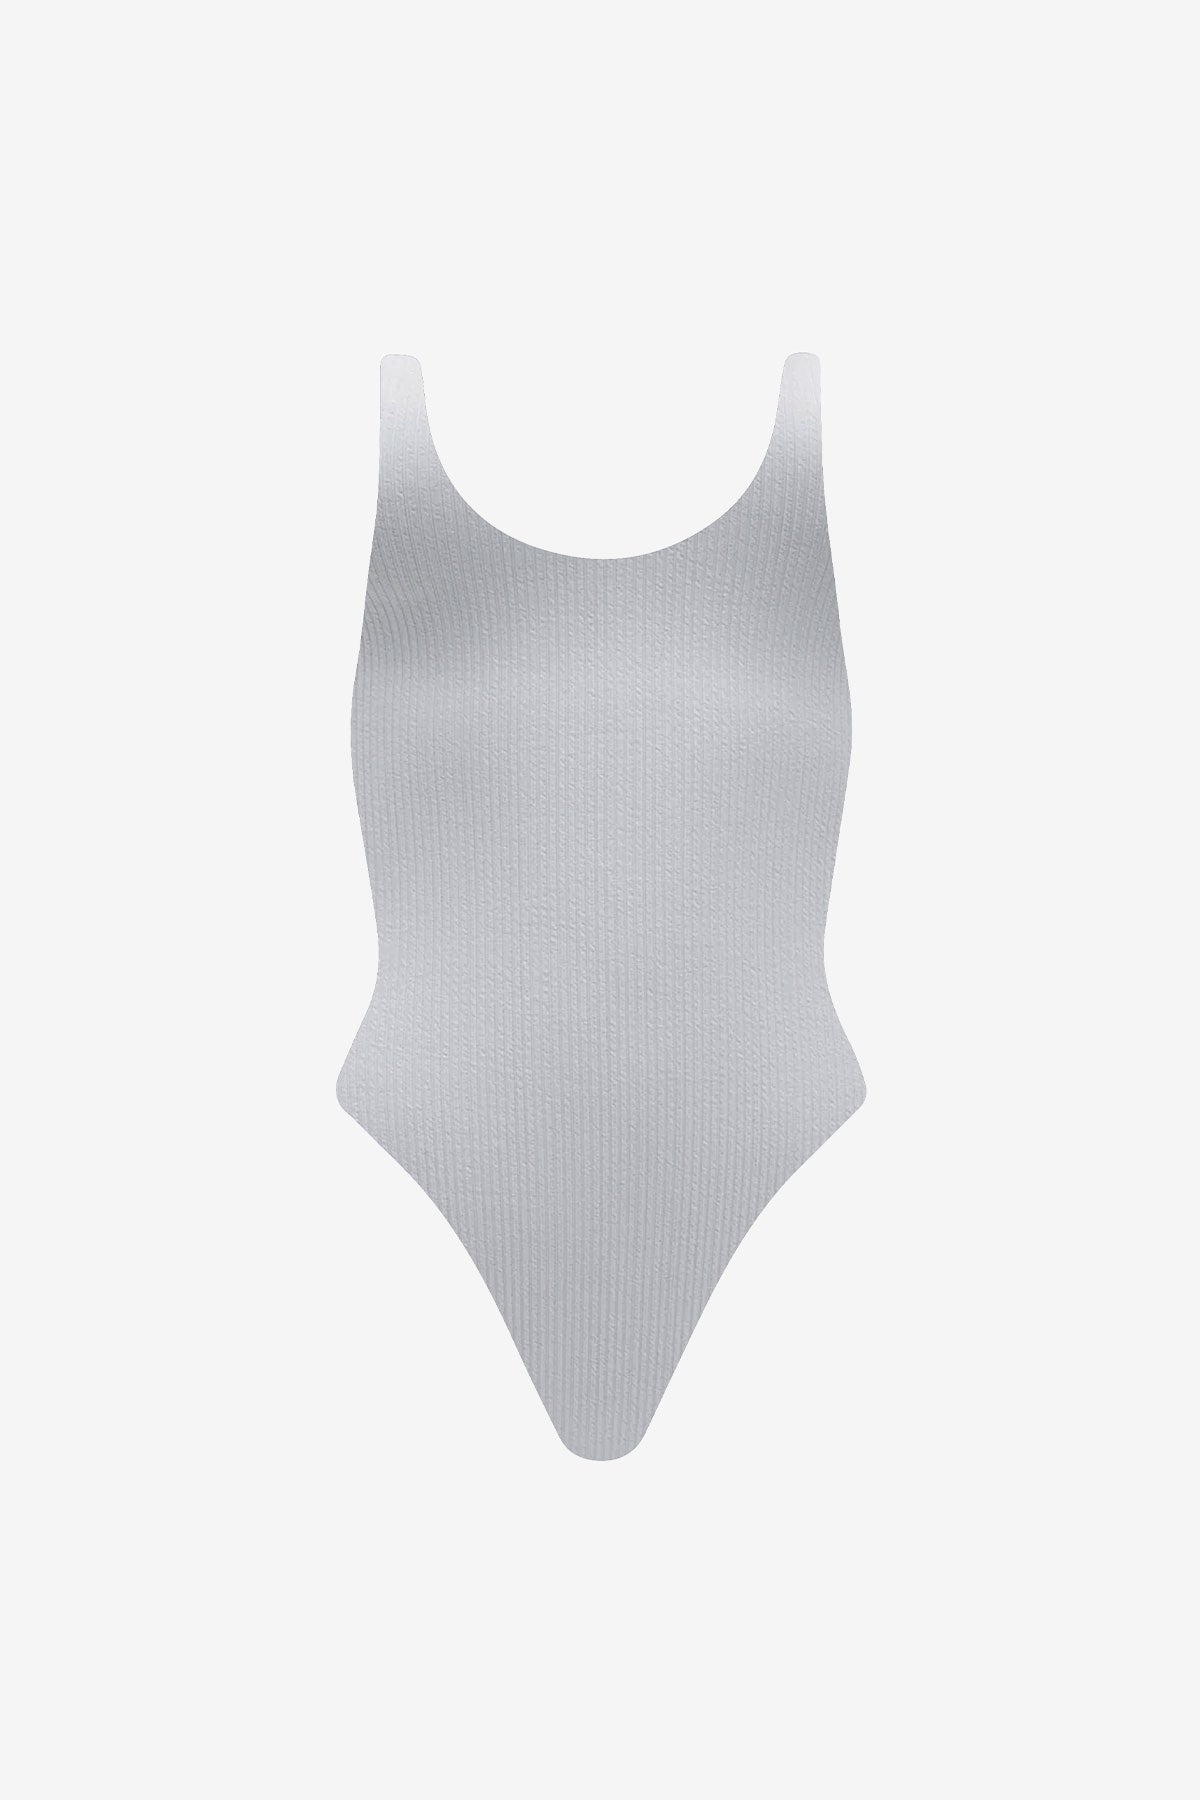 Olympic One-Piece in White